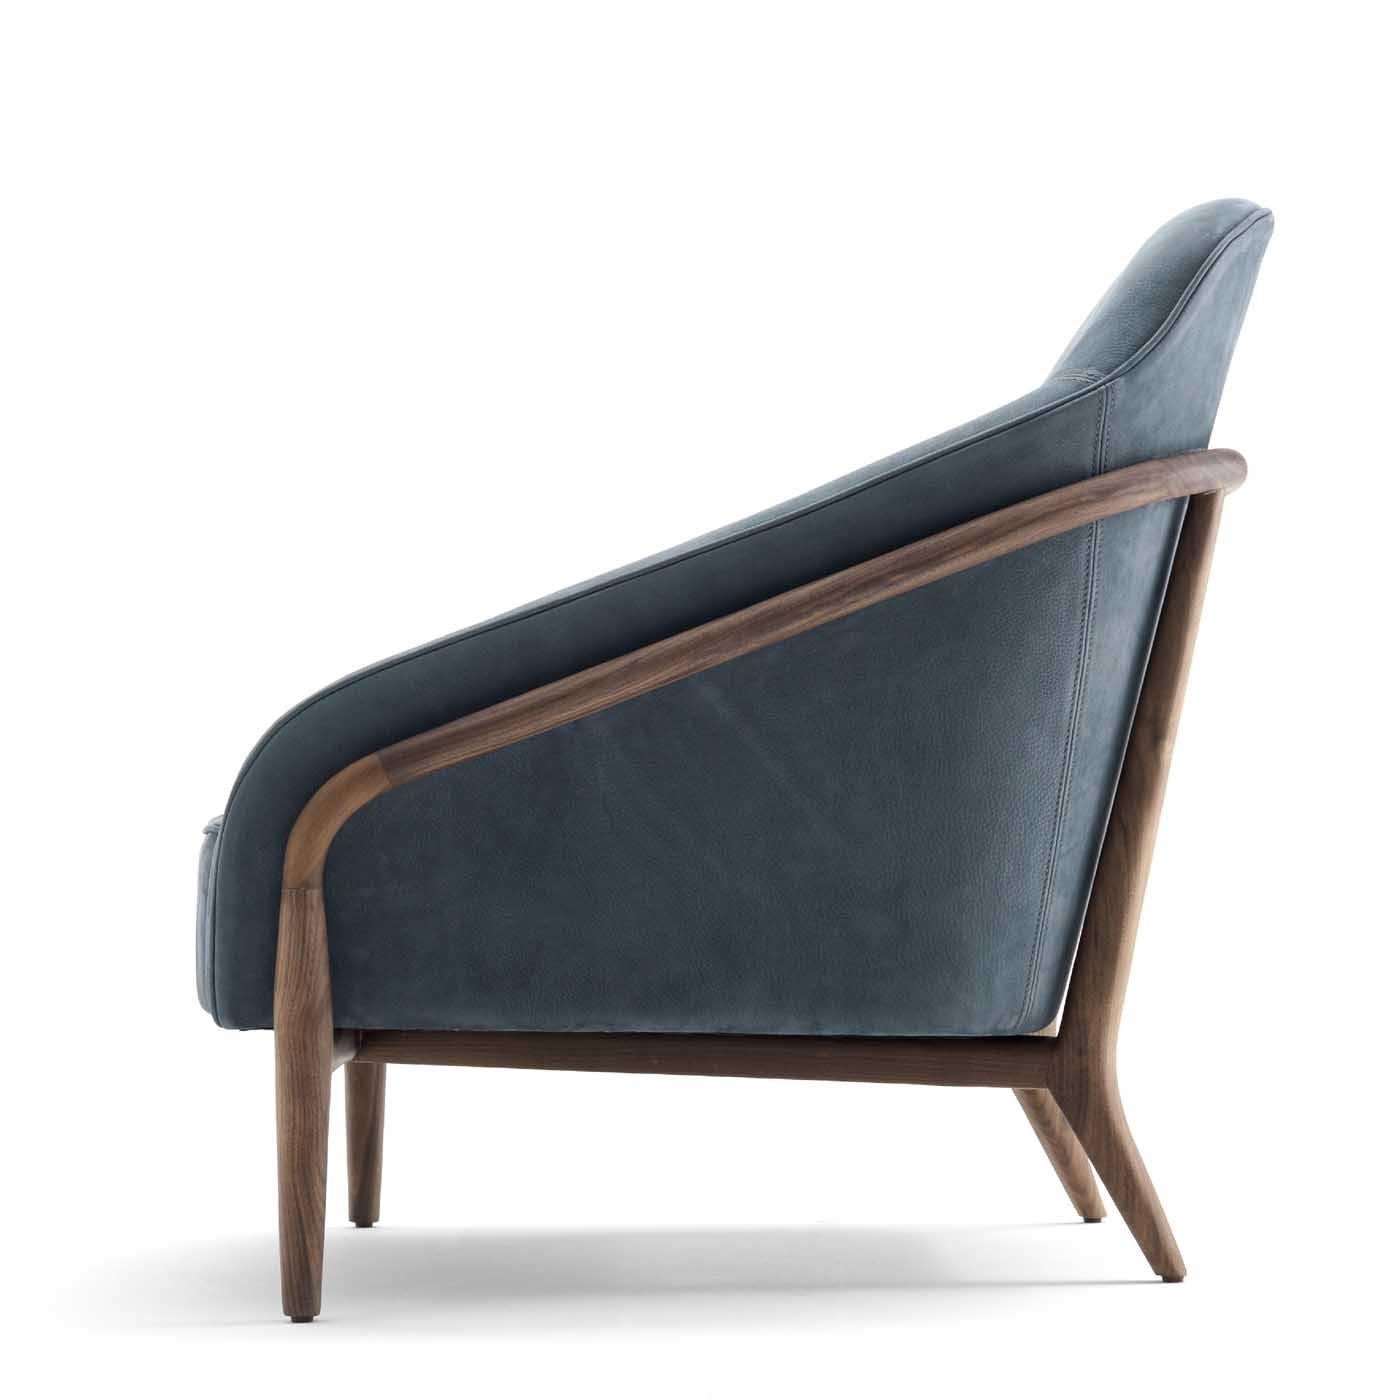 This elegant armchair is a celebration of mid-century charm and can be paired with the Doris Sofa for a cohesive visual effect, adding comfortable seating space and elegance to a modern interior. The structure in American walnut features slanted